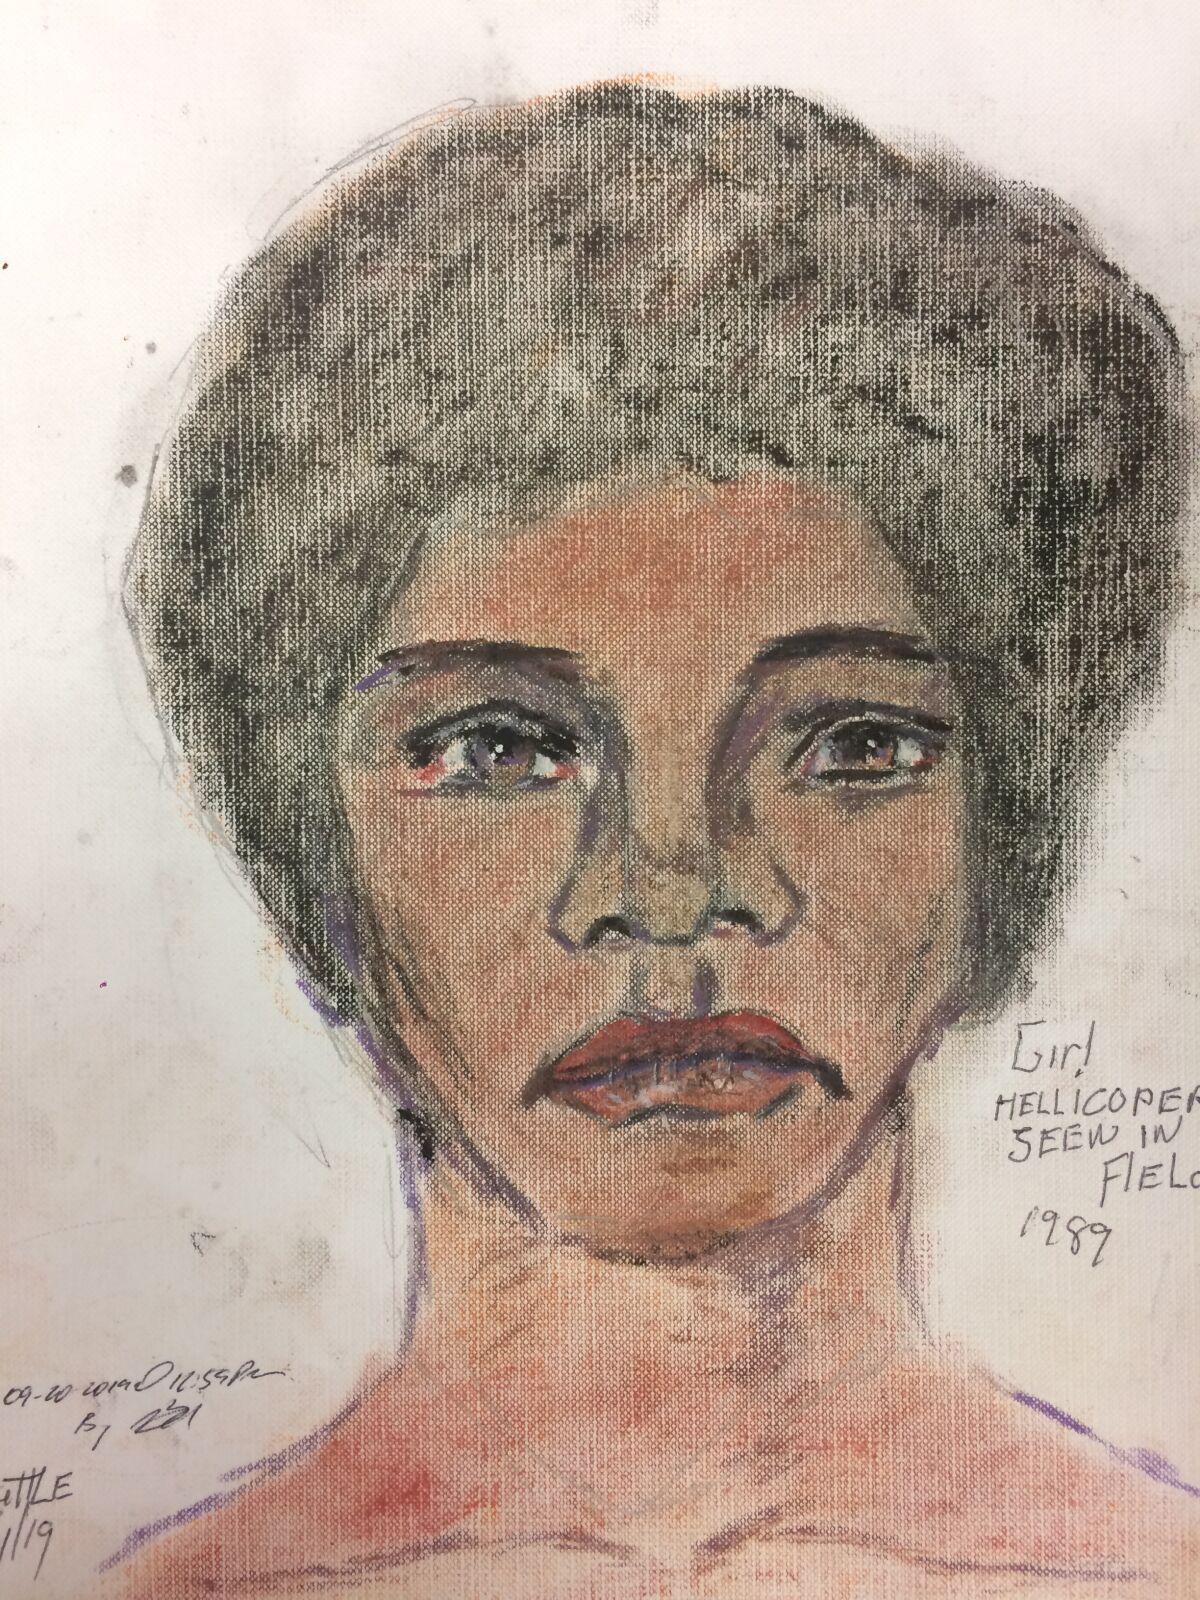 Samuel Little says he strangled this woman and left her body in tall grass in Los Angeles County.